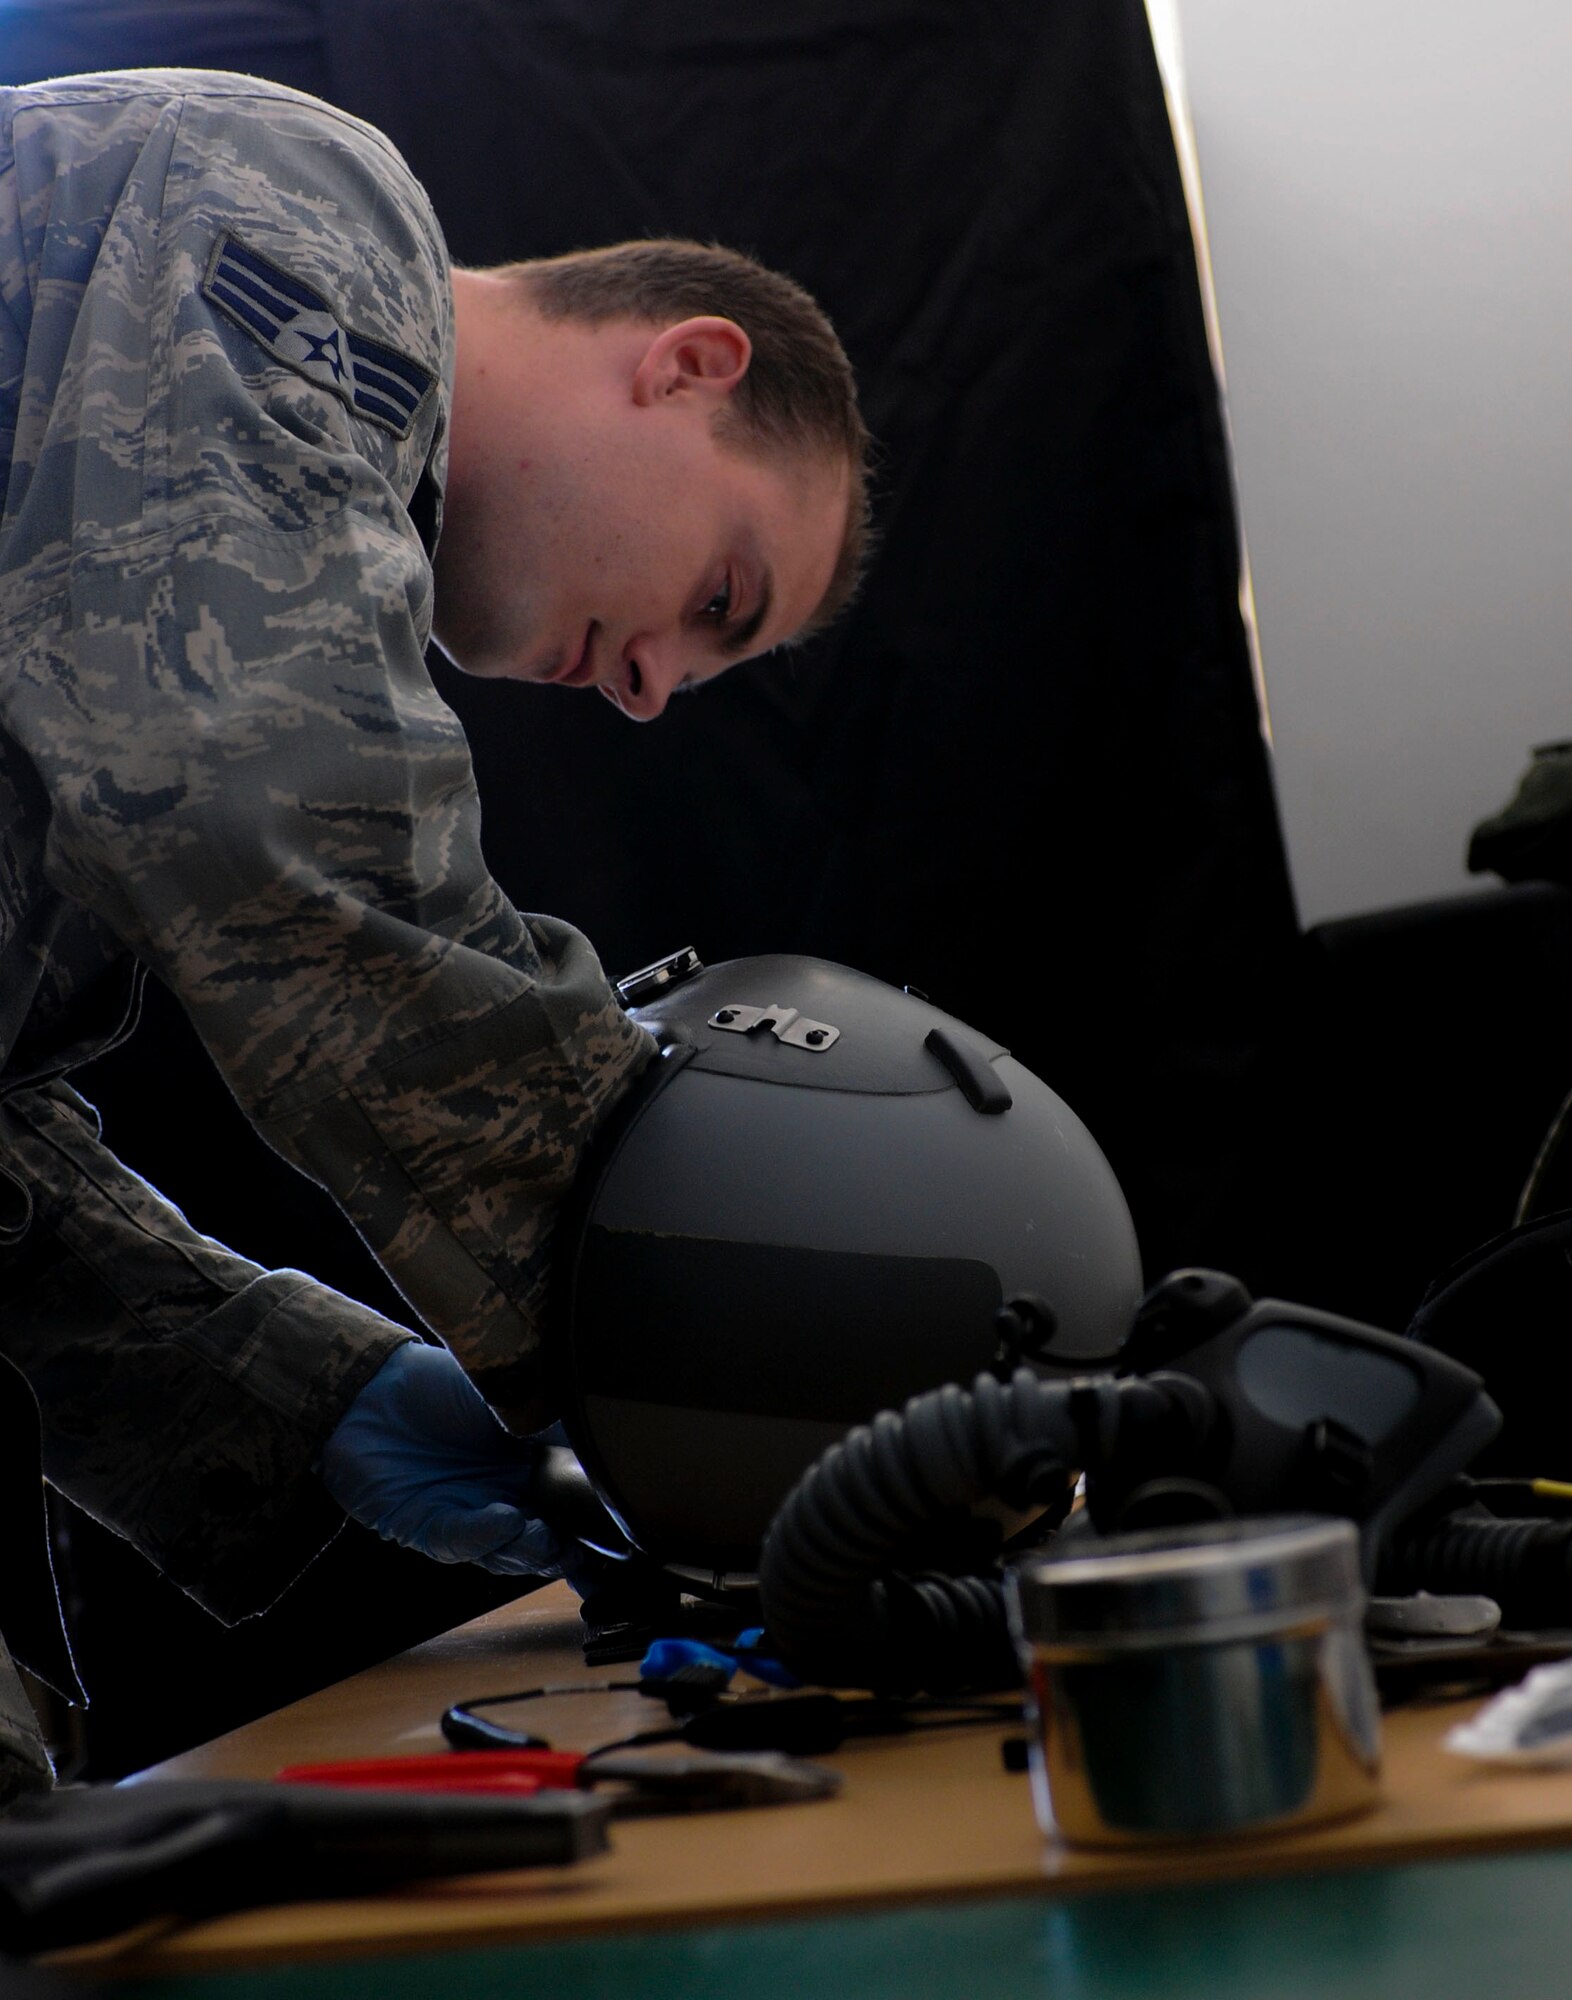 NAMEST AIR BASE, Czech Republic -- Senior Airman Brandon Keiper, 52nd Operations Support Squadron flight crew equipment maintainer, adjusts parts of a pilot's helmet as part of a 30-day inspection Sept. 10, during Ramstein Rover 2012 here.The 81st Fighter sqaudron is participating in RARO 12 to build partnerships and exchange tactics techniques and procedures with more than 16 NATO nations. A-10 Thunderbolt IIs from the 81st Fighter Squadron are providing close air support to partnering nations and practicing forward air control missions with their NATO allies in international security assistance force realistic scenarios throughtout the exercise. Participating in exercises like RARO 12 ensures effective employment of airpower in support of alliance or coalition forces while mitigating risks to civilians in contingency operations. (U.S. Air Force photo by Senior Airman Natasha Stannard/Released)